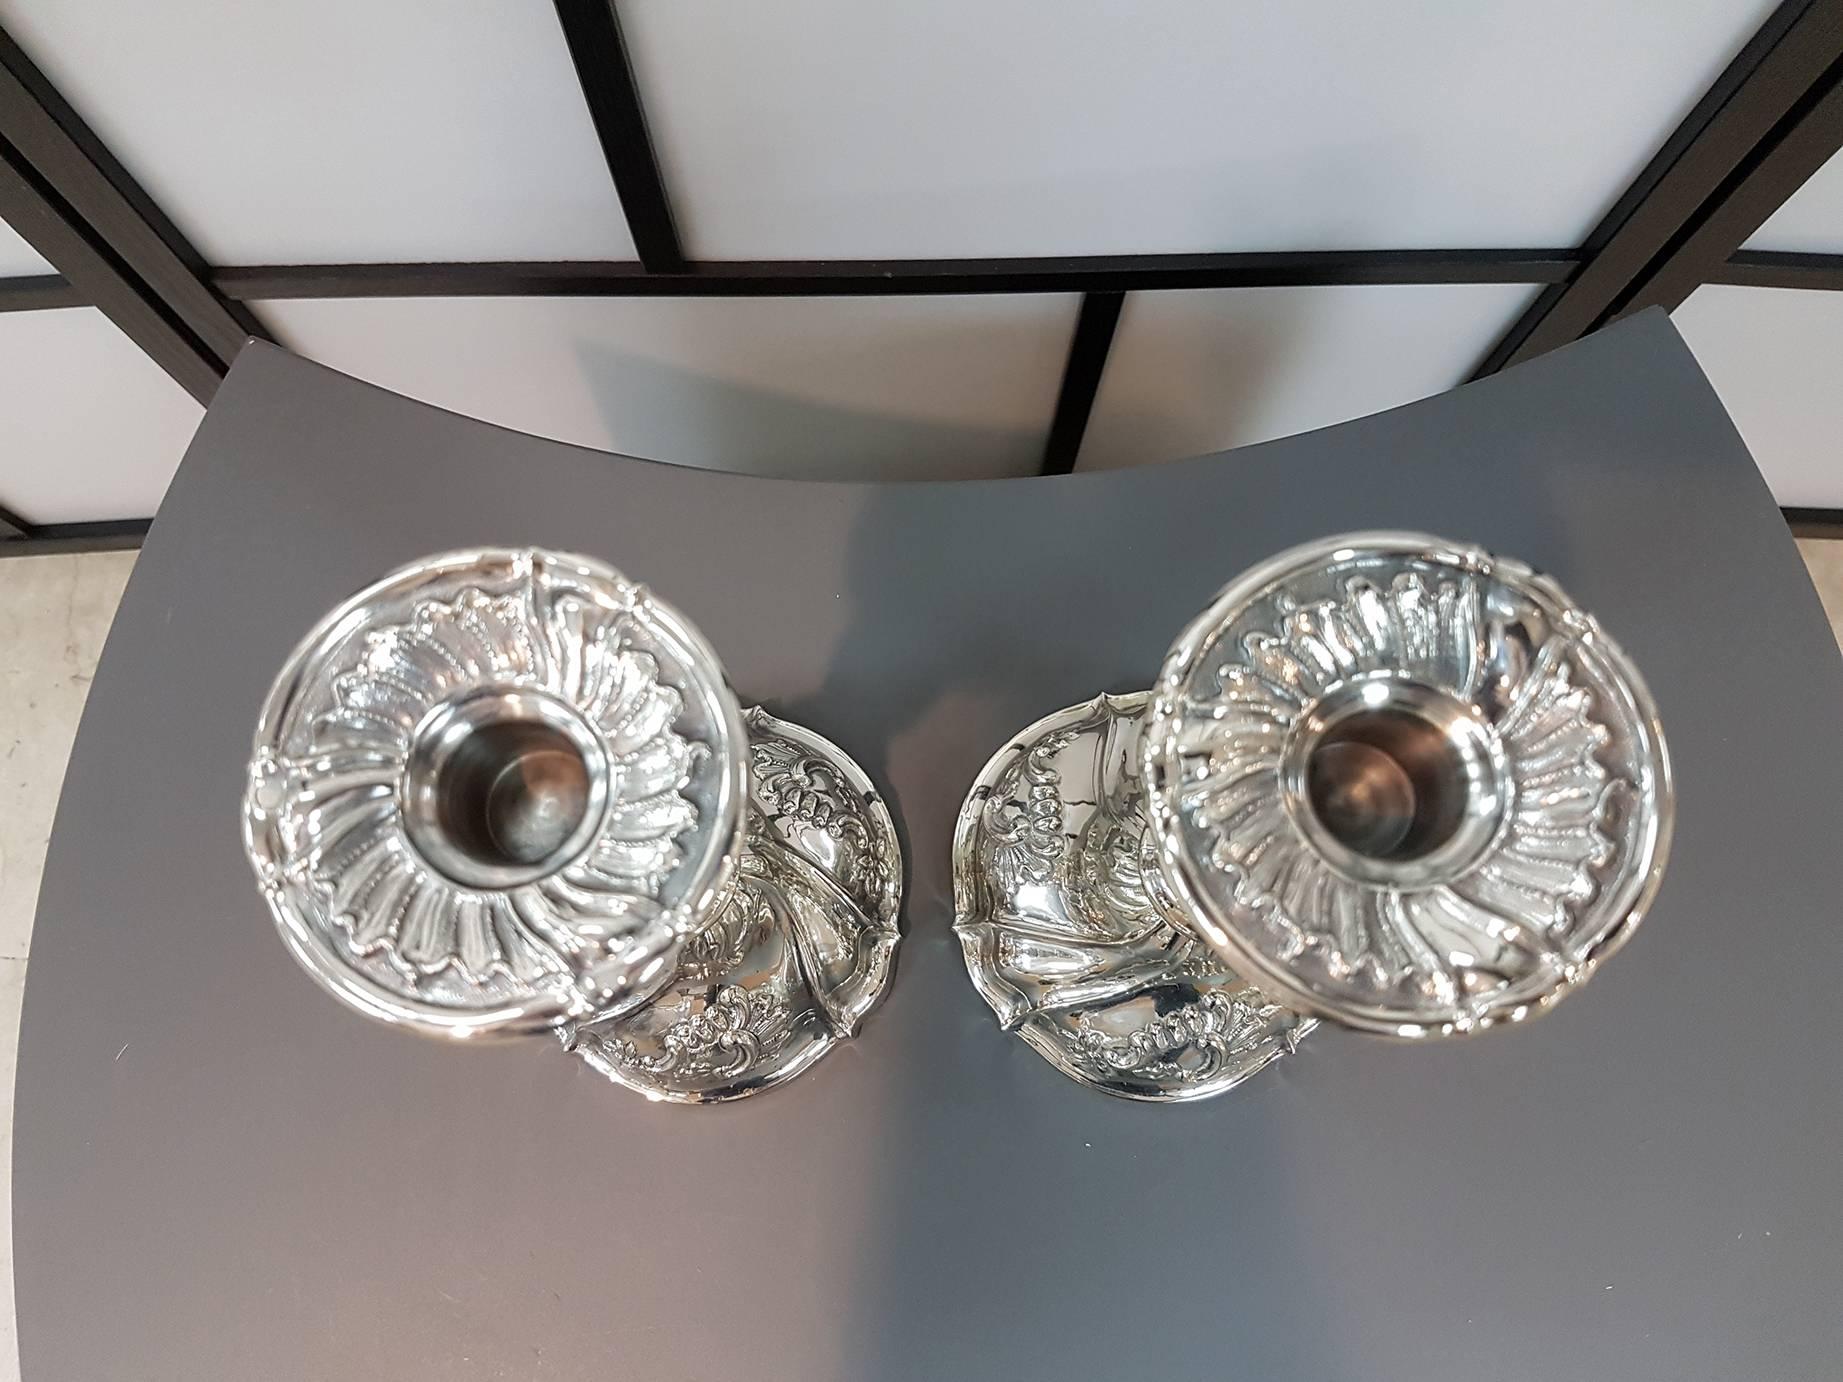 Pair of silver 800 candlesticks in Italian Barocco Genoese style.
The body worked on silver sheet was embossed and engraved by hand
with scrolls and flowers
Measure: 820 grams.